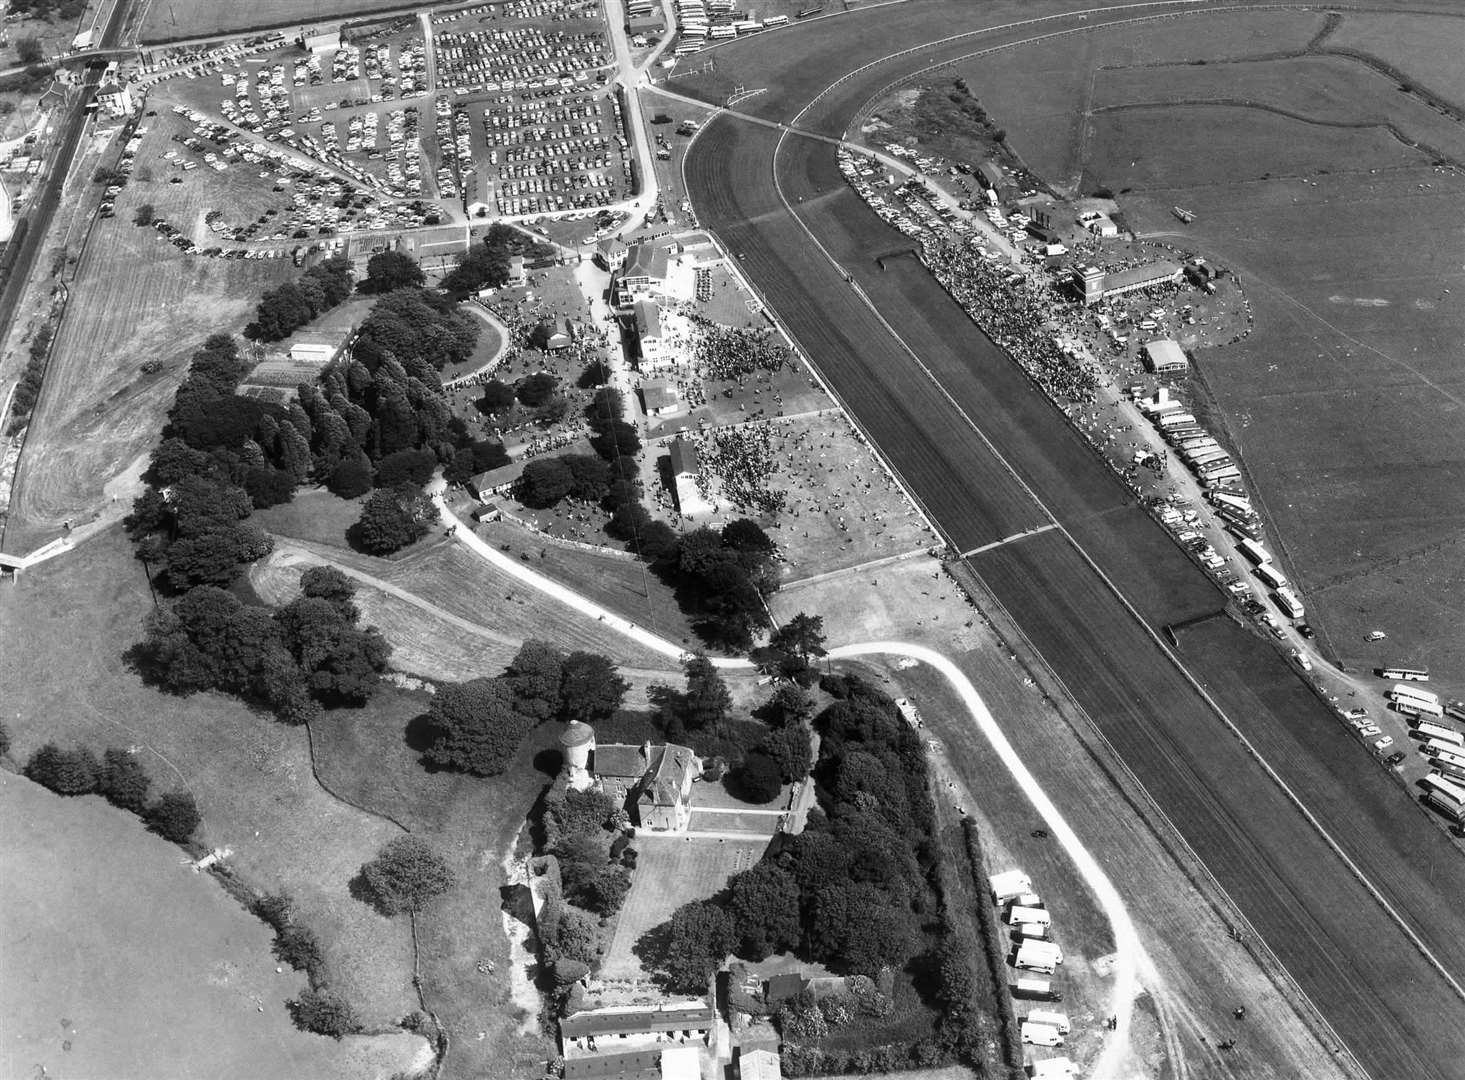 An aerial view of Folkestone racecourse in 1962